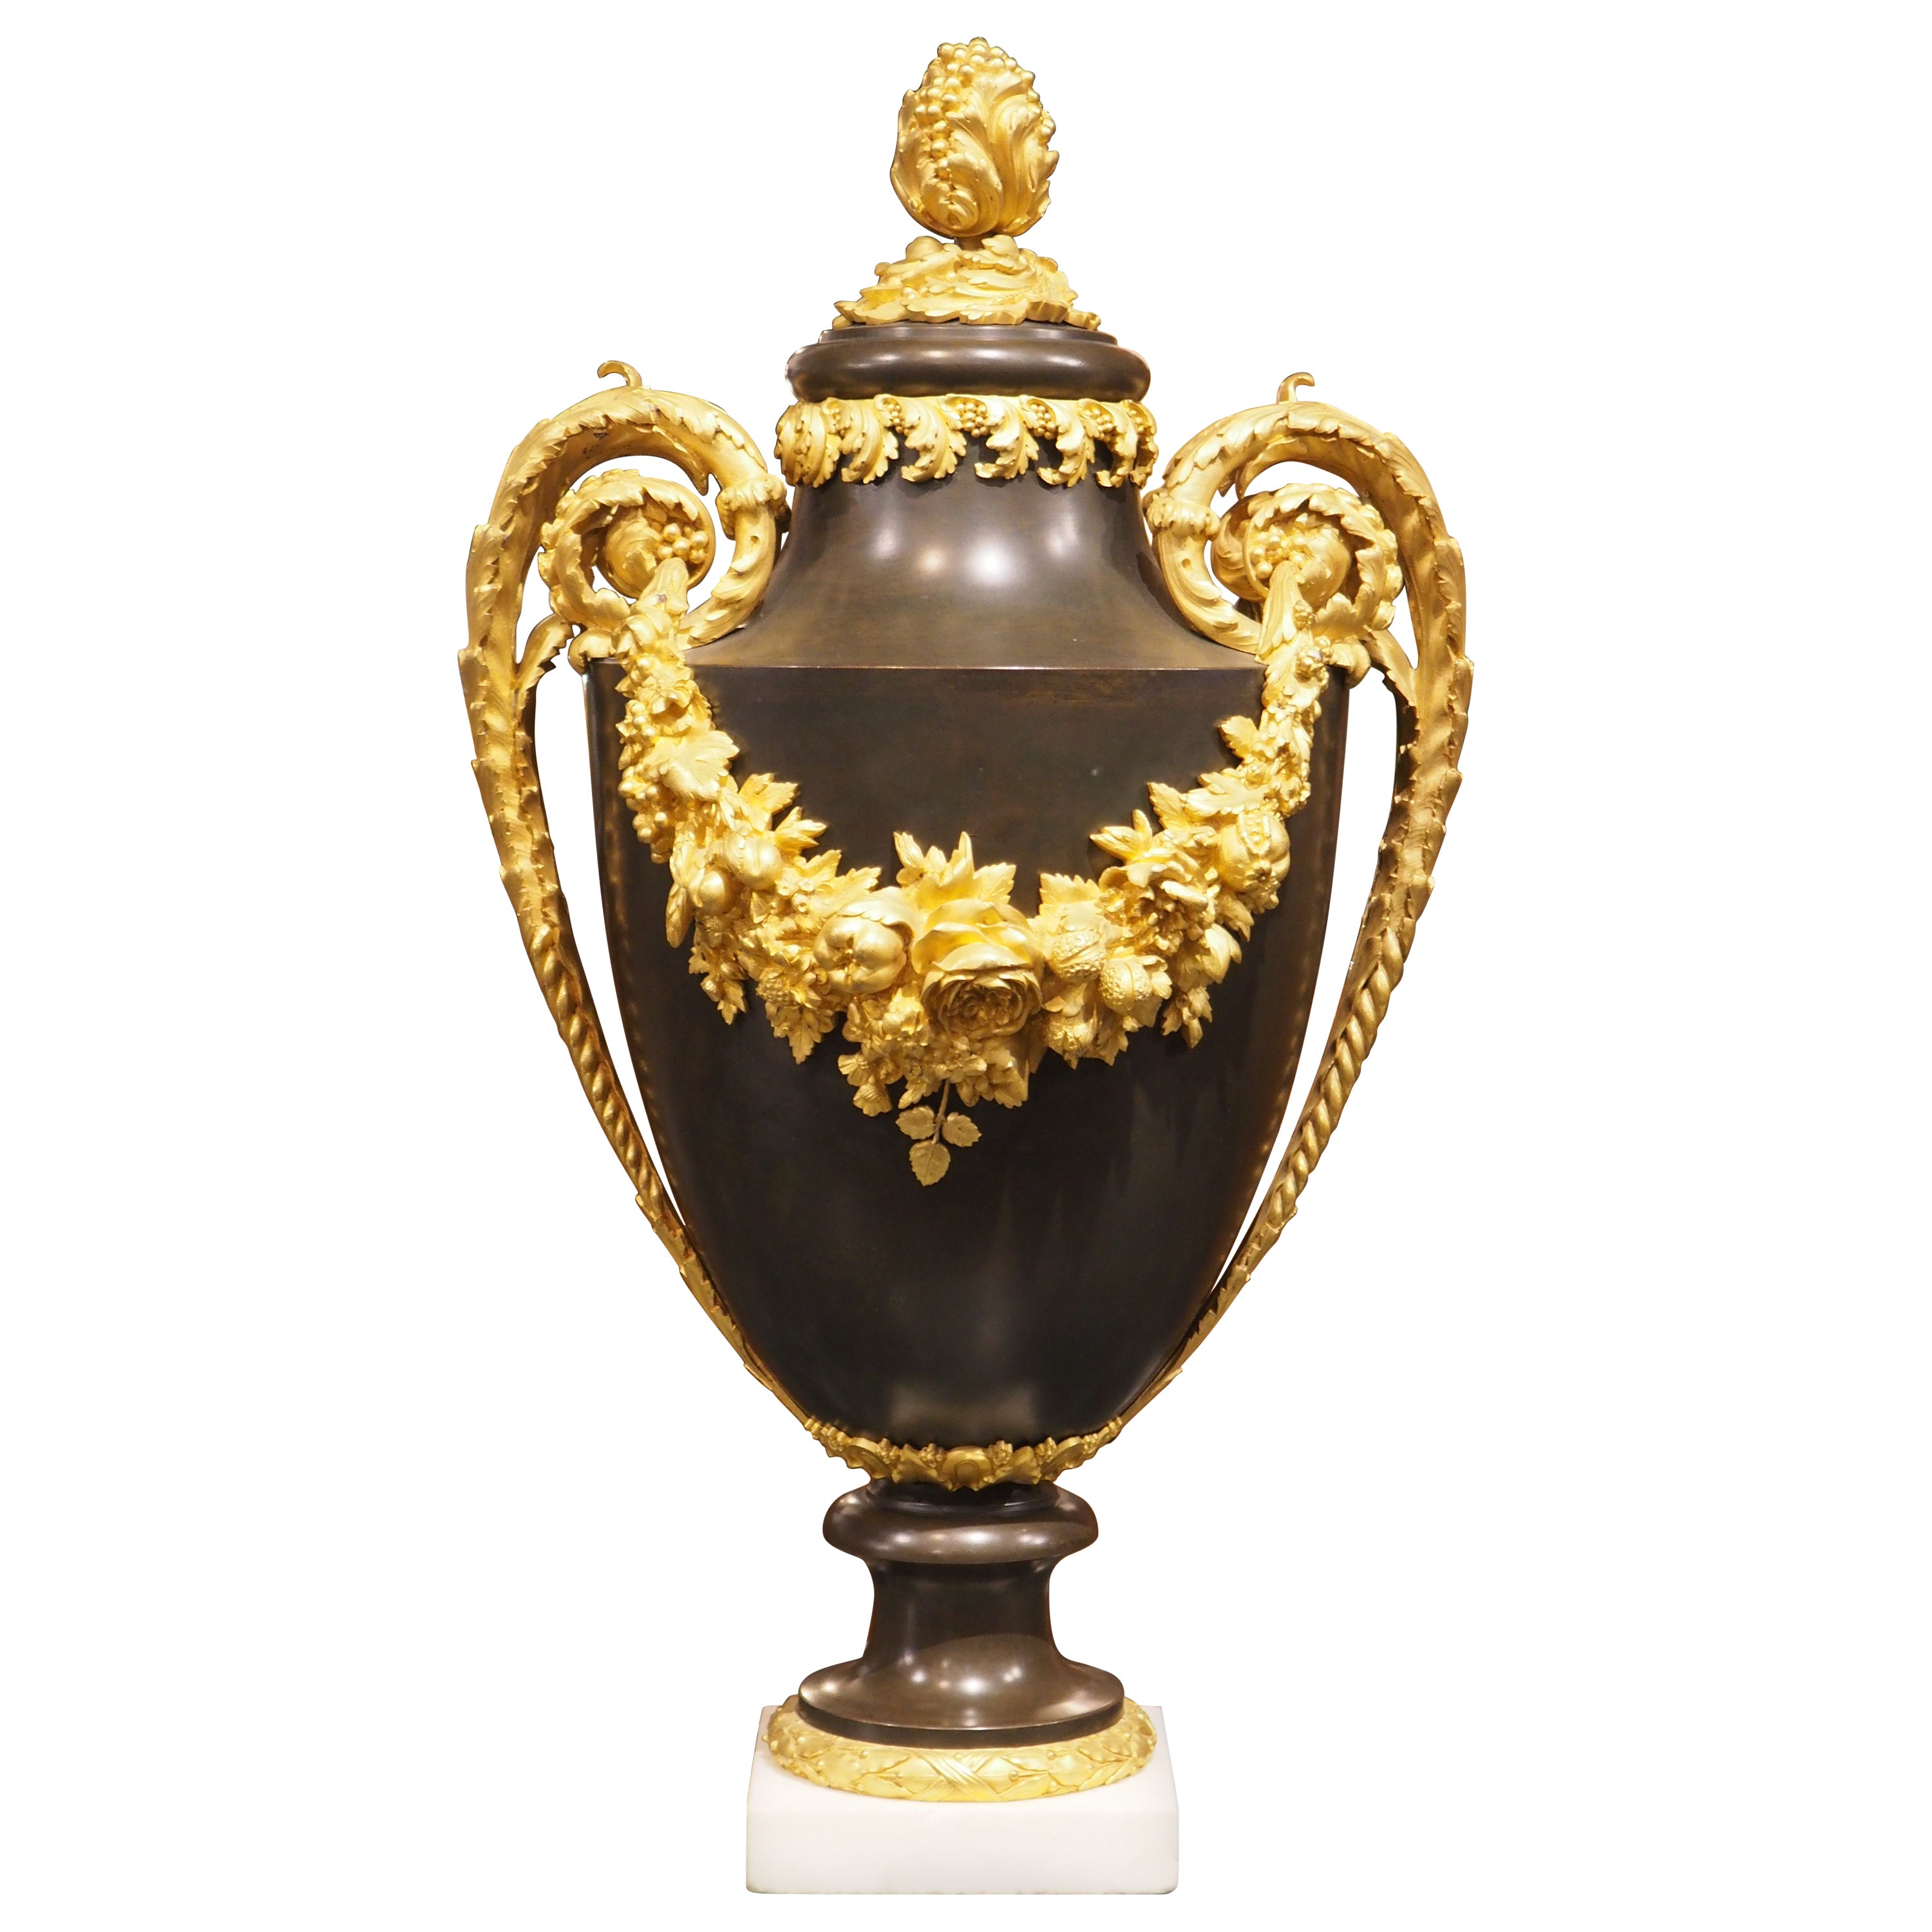 A Grand French Louis XVI Style Gilt Bronze Mounted Urn, Circa 1860 For Sale